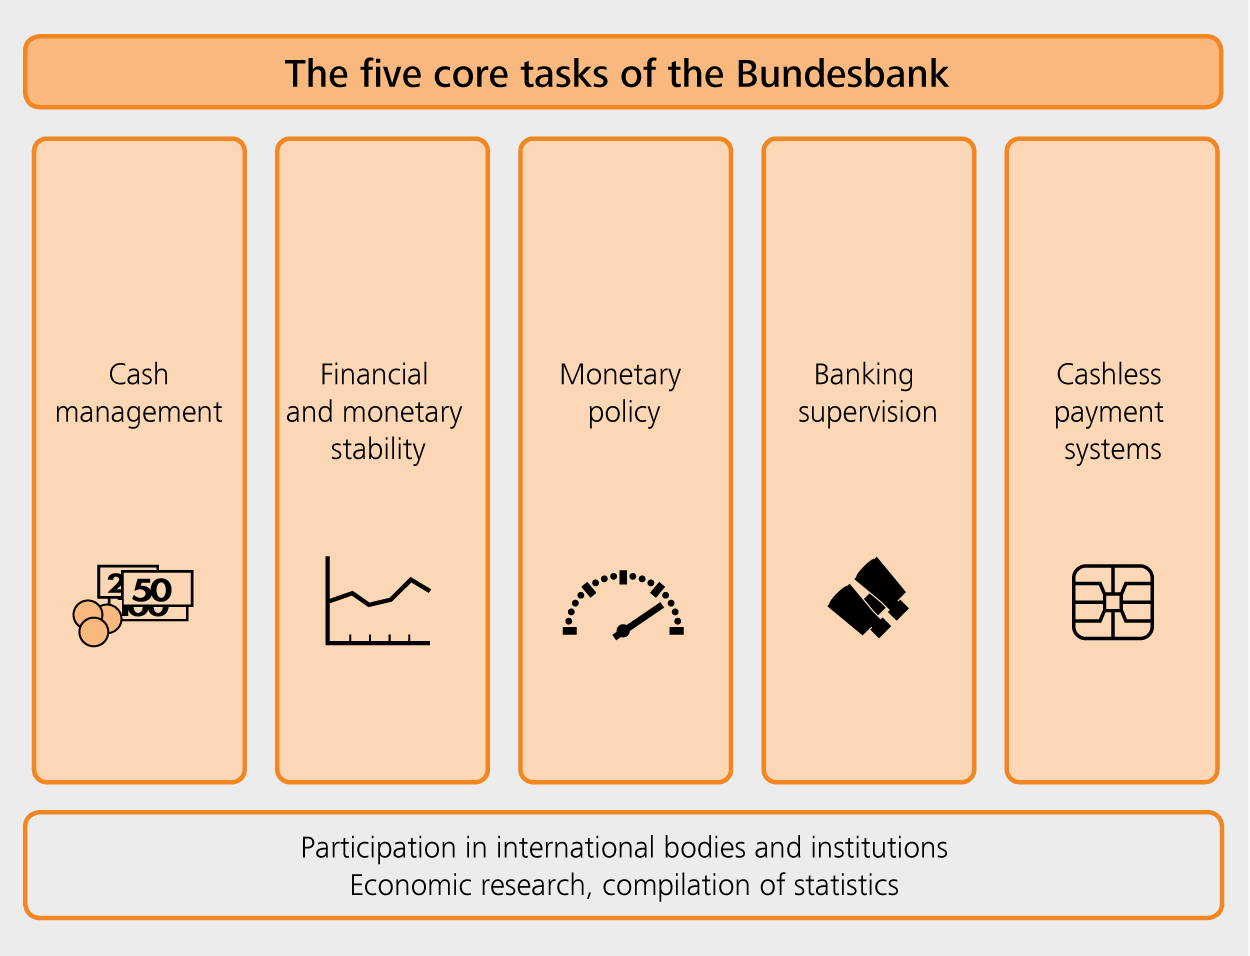 The five core tasks of the Bundesbank